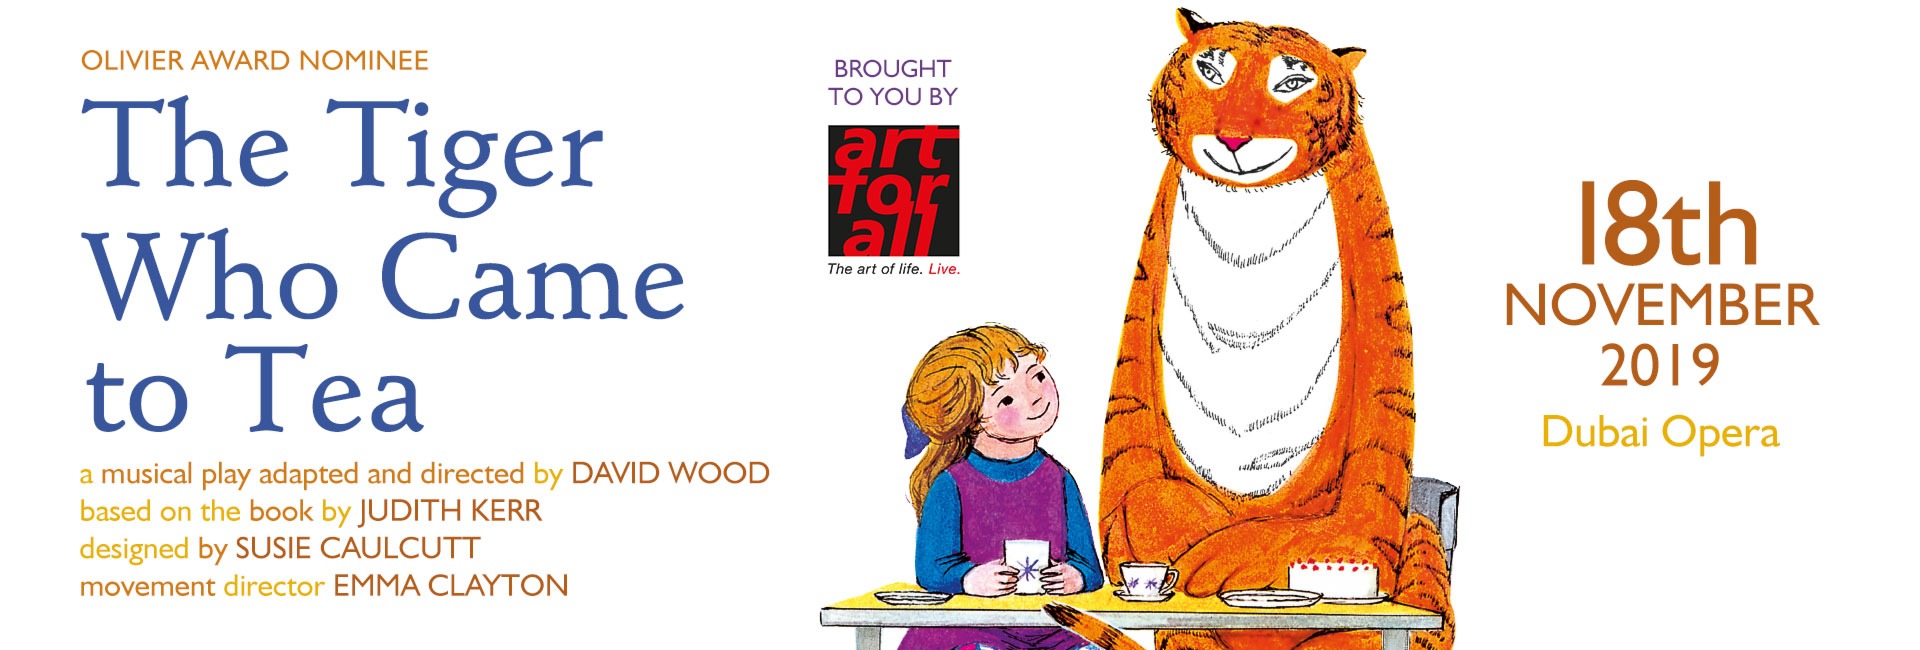 The Tiger Who Came To Tea at the Dubai Opera - Coming Soon in UAE